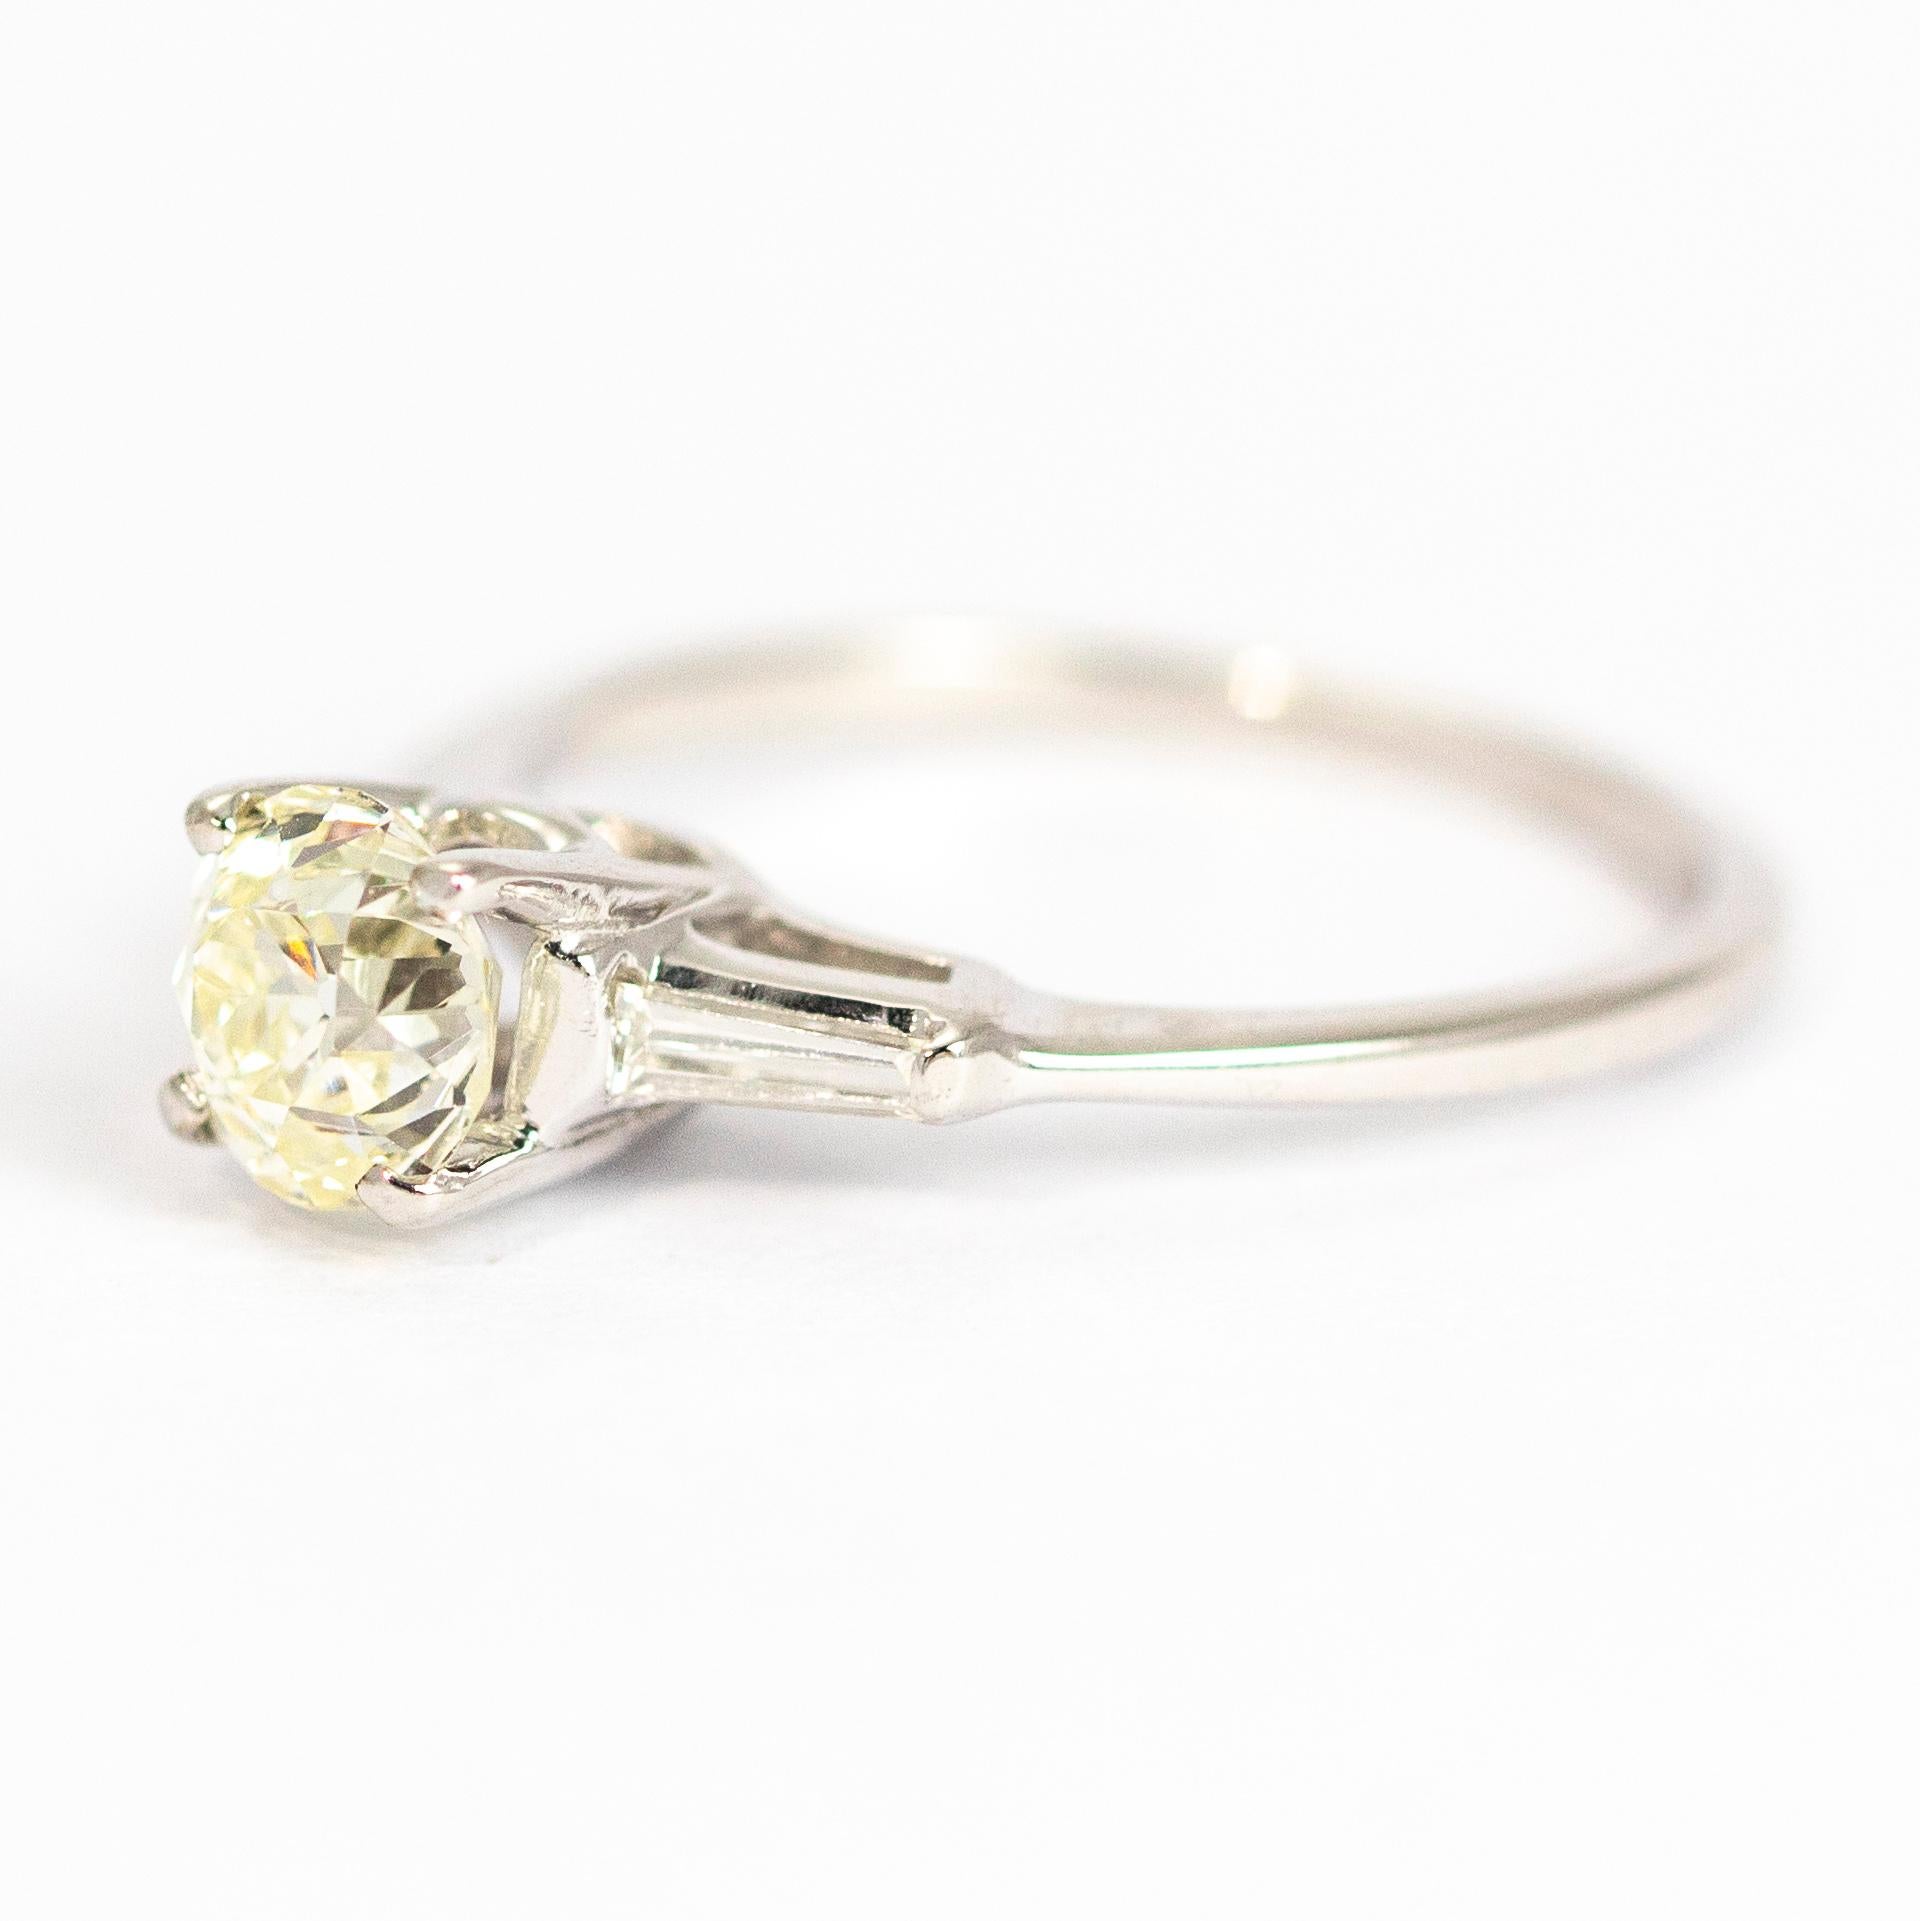 A sparkling 1carat diamond sits proud on the top of this 14ct white gold beauty. The centre diamond sits on top of a simple open work setting. Either side of the centre stone are two tapered baguettes which finish the ring off perfectly.

Ring Size: